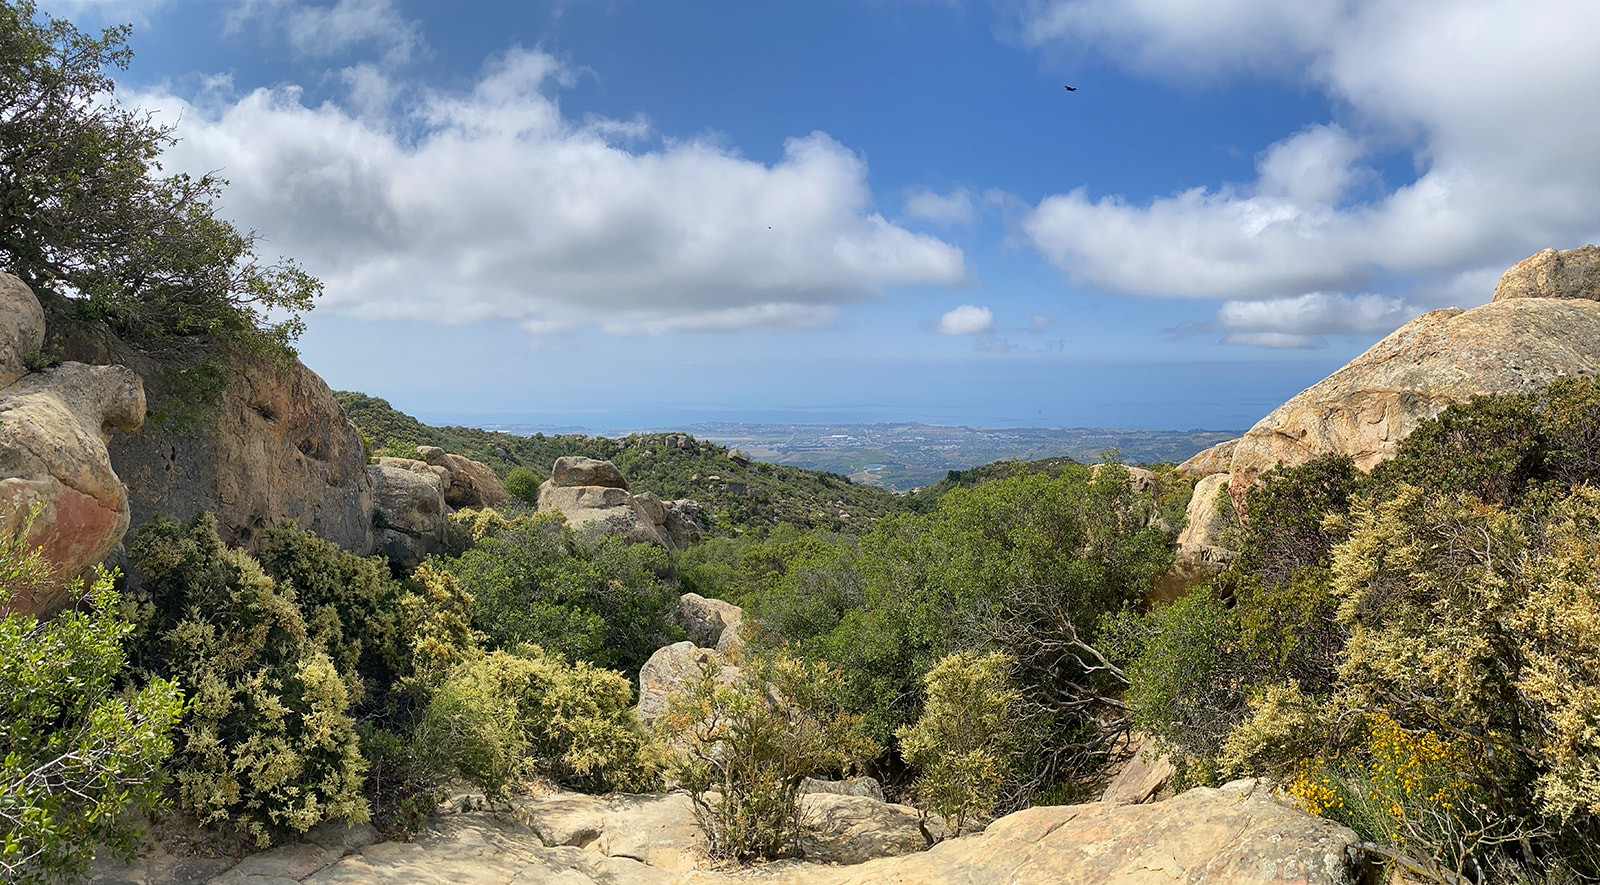 View while hiking at Lizards Mouth Rock outside of Los Angeles, California